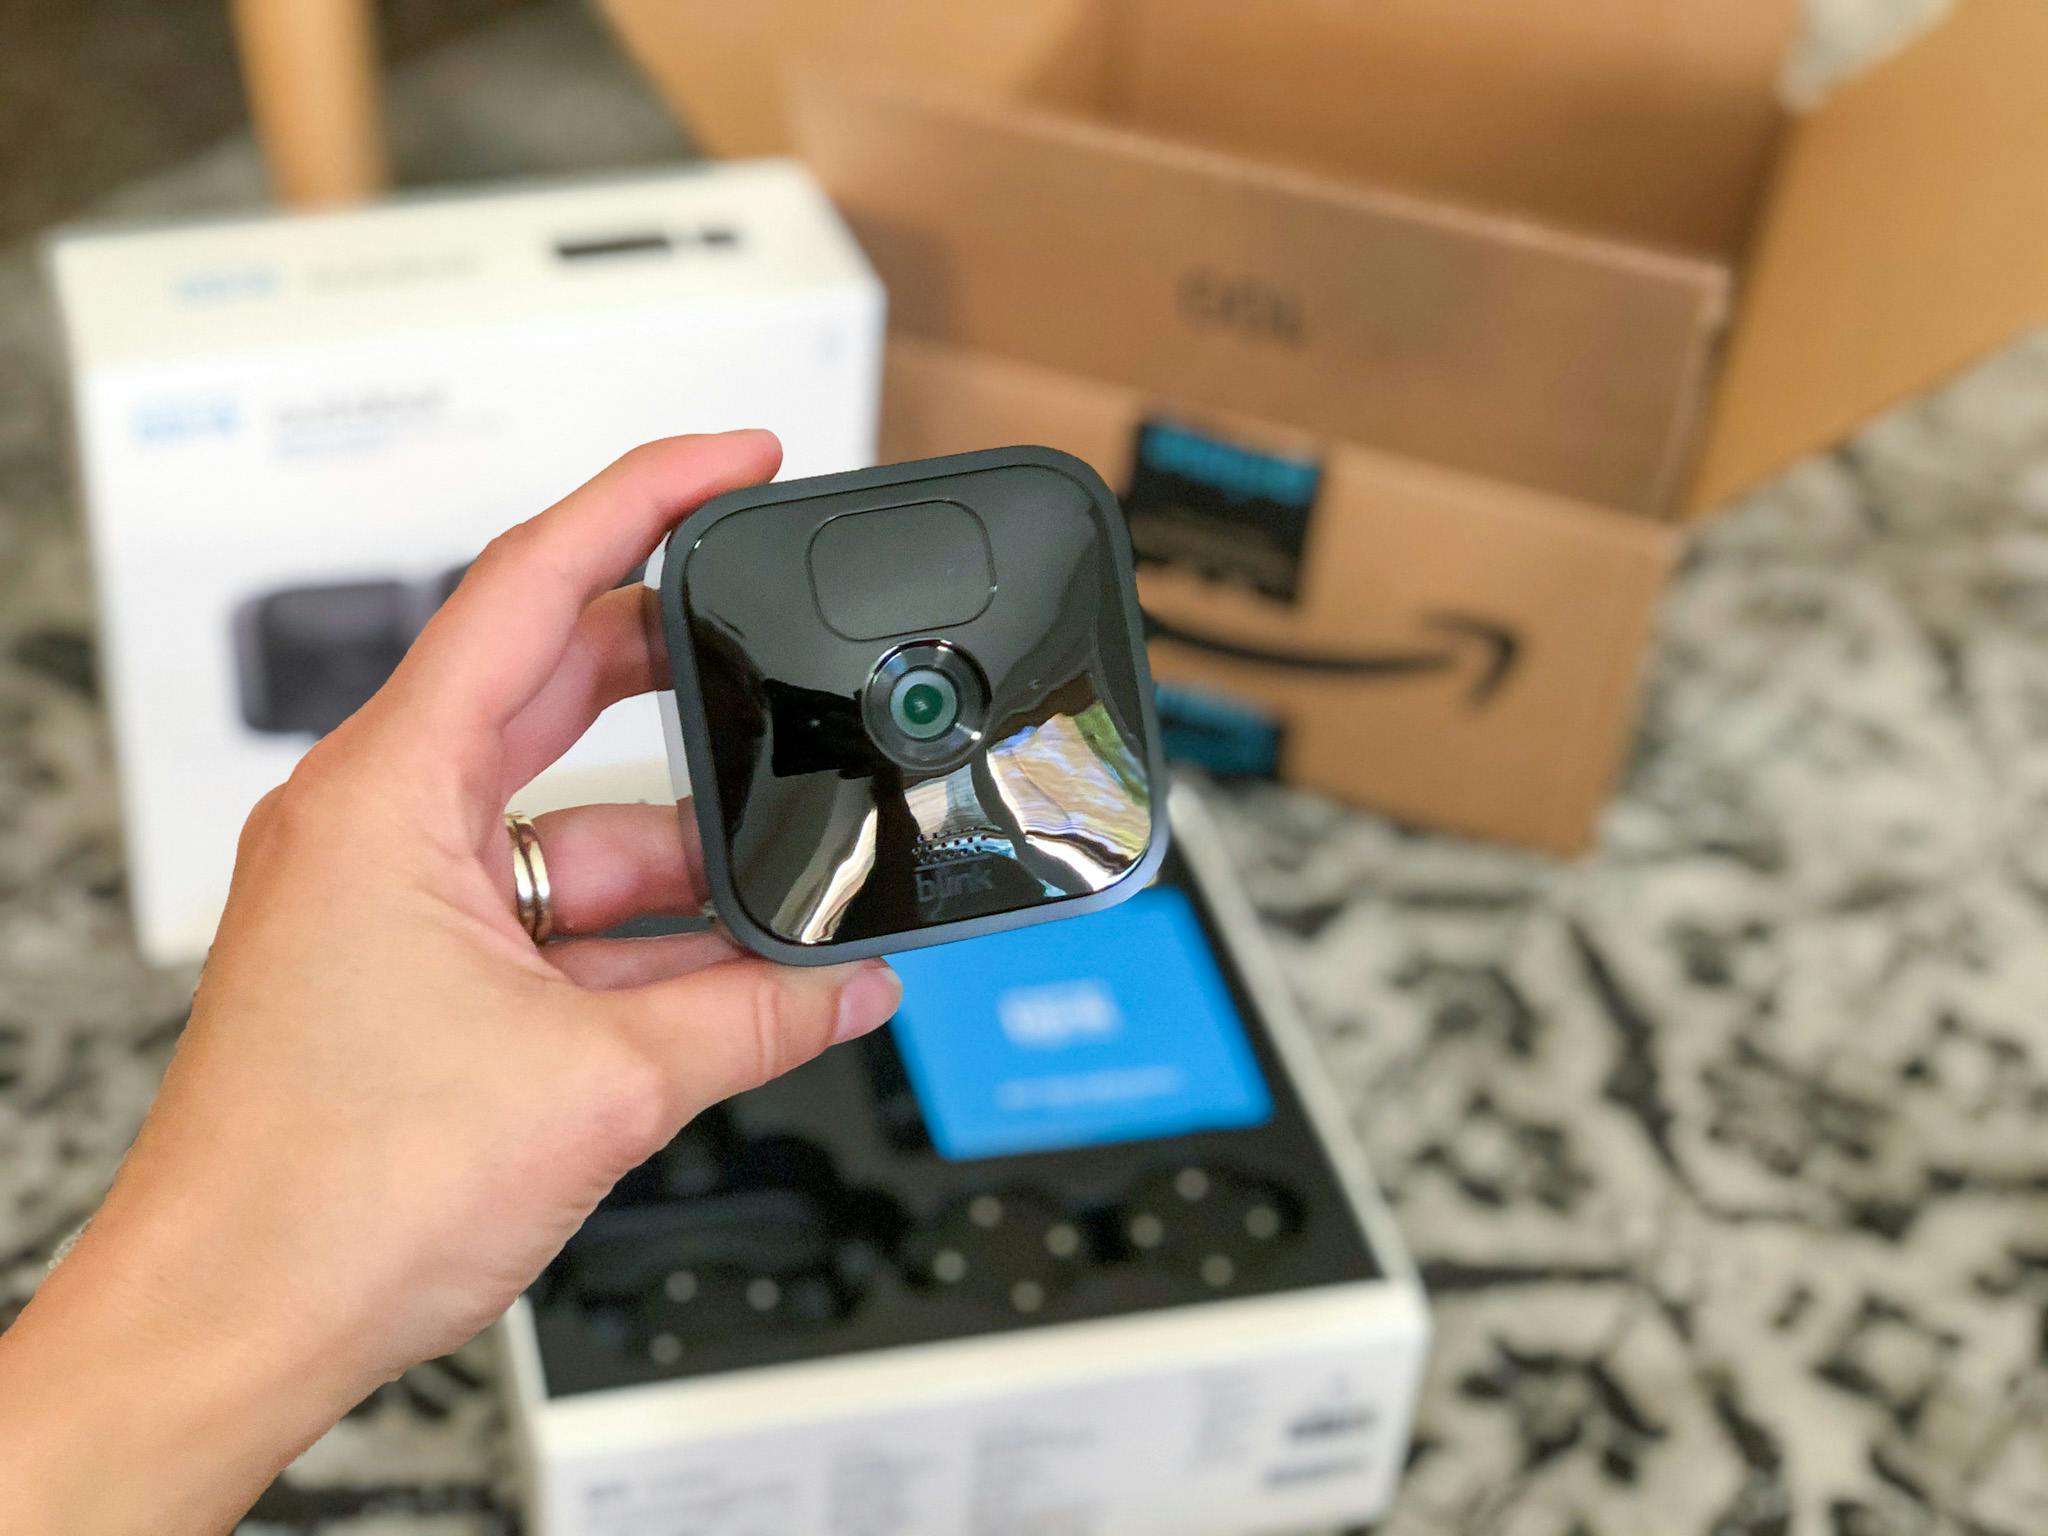 blink camera deals - A person's hand holding a Blink outdoor wireless security camera above its box next to an Amazon delivery box.